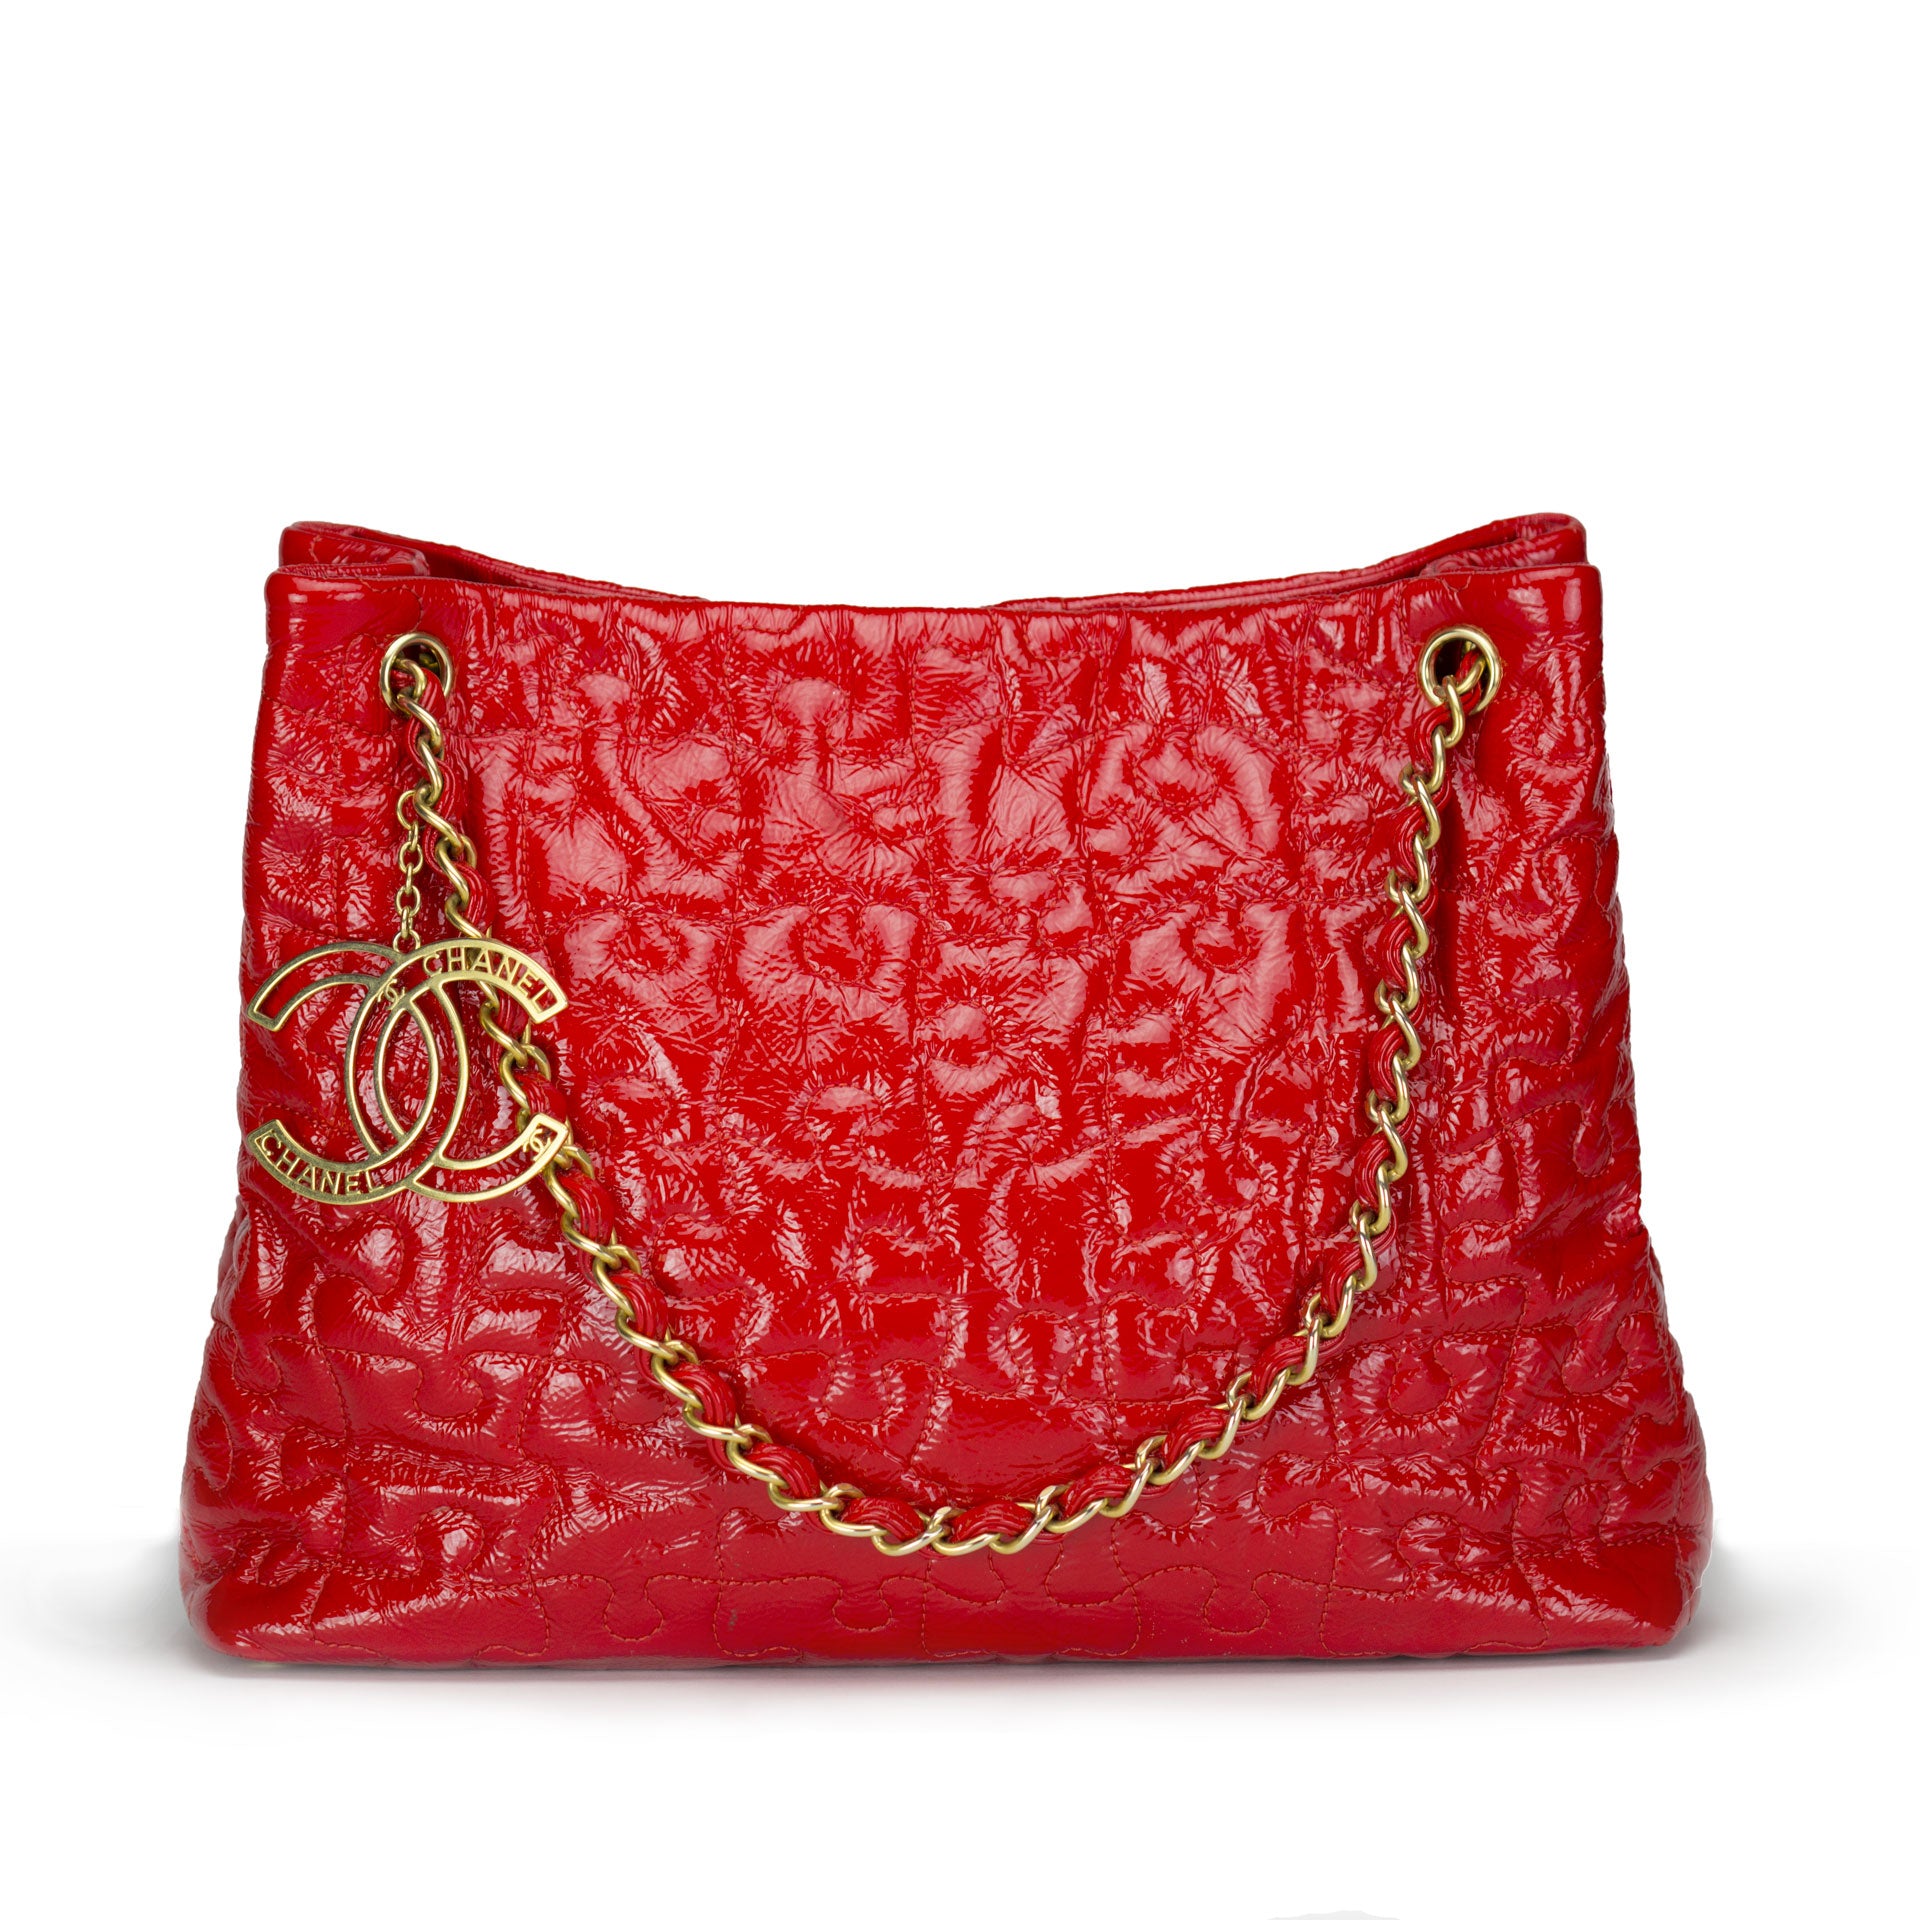 Chanel Red Patent Bag - 27 For Sale on 1stDibs  chanel patent leather bag  price, red patent leather bag, chanel patent mini